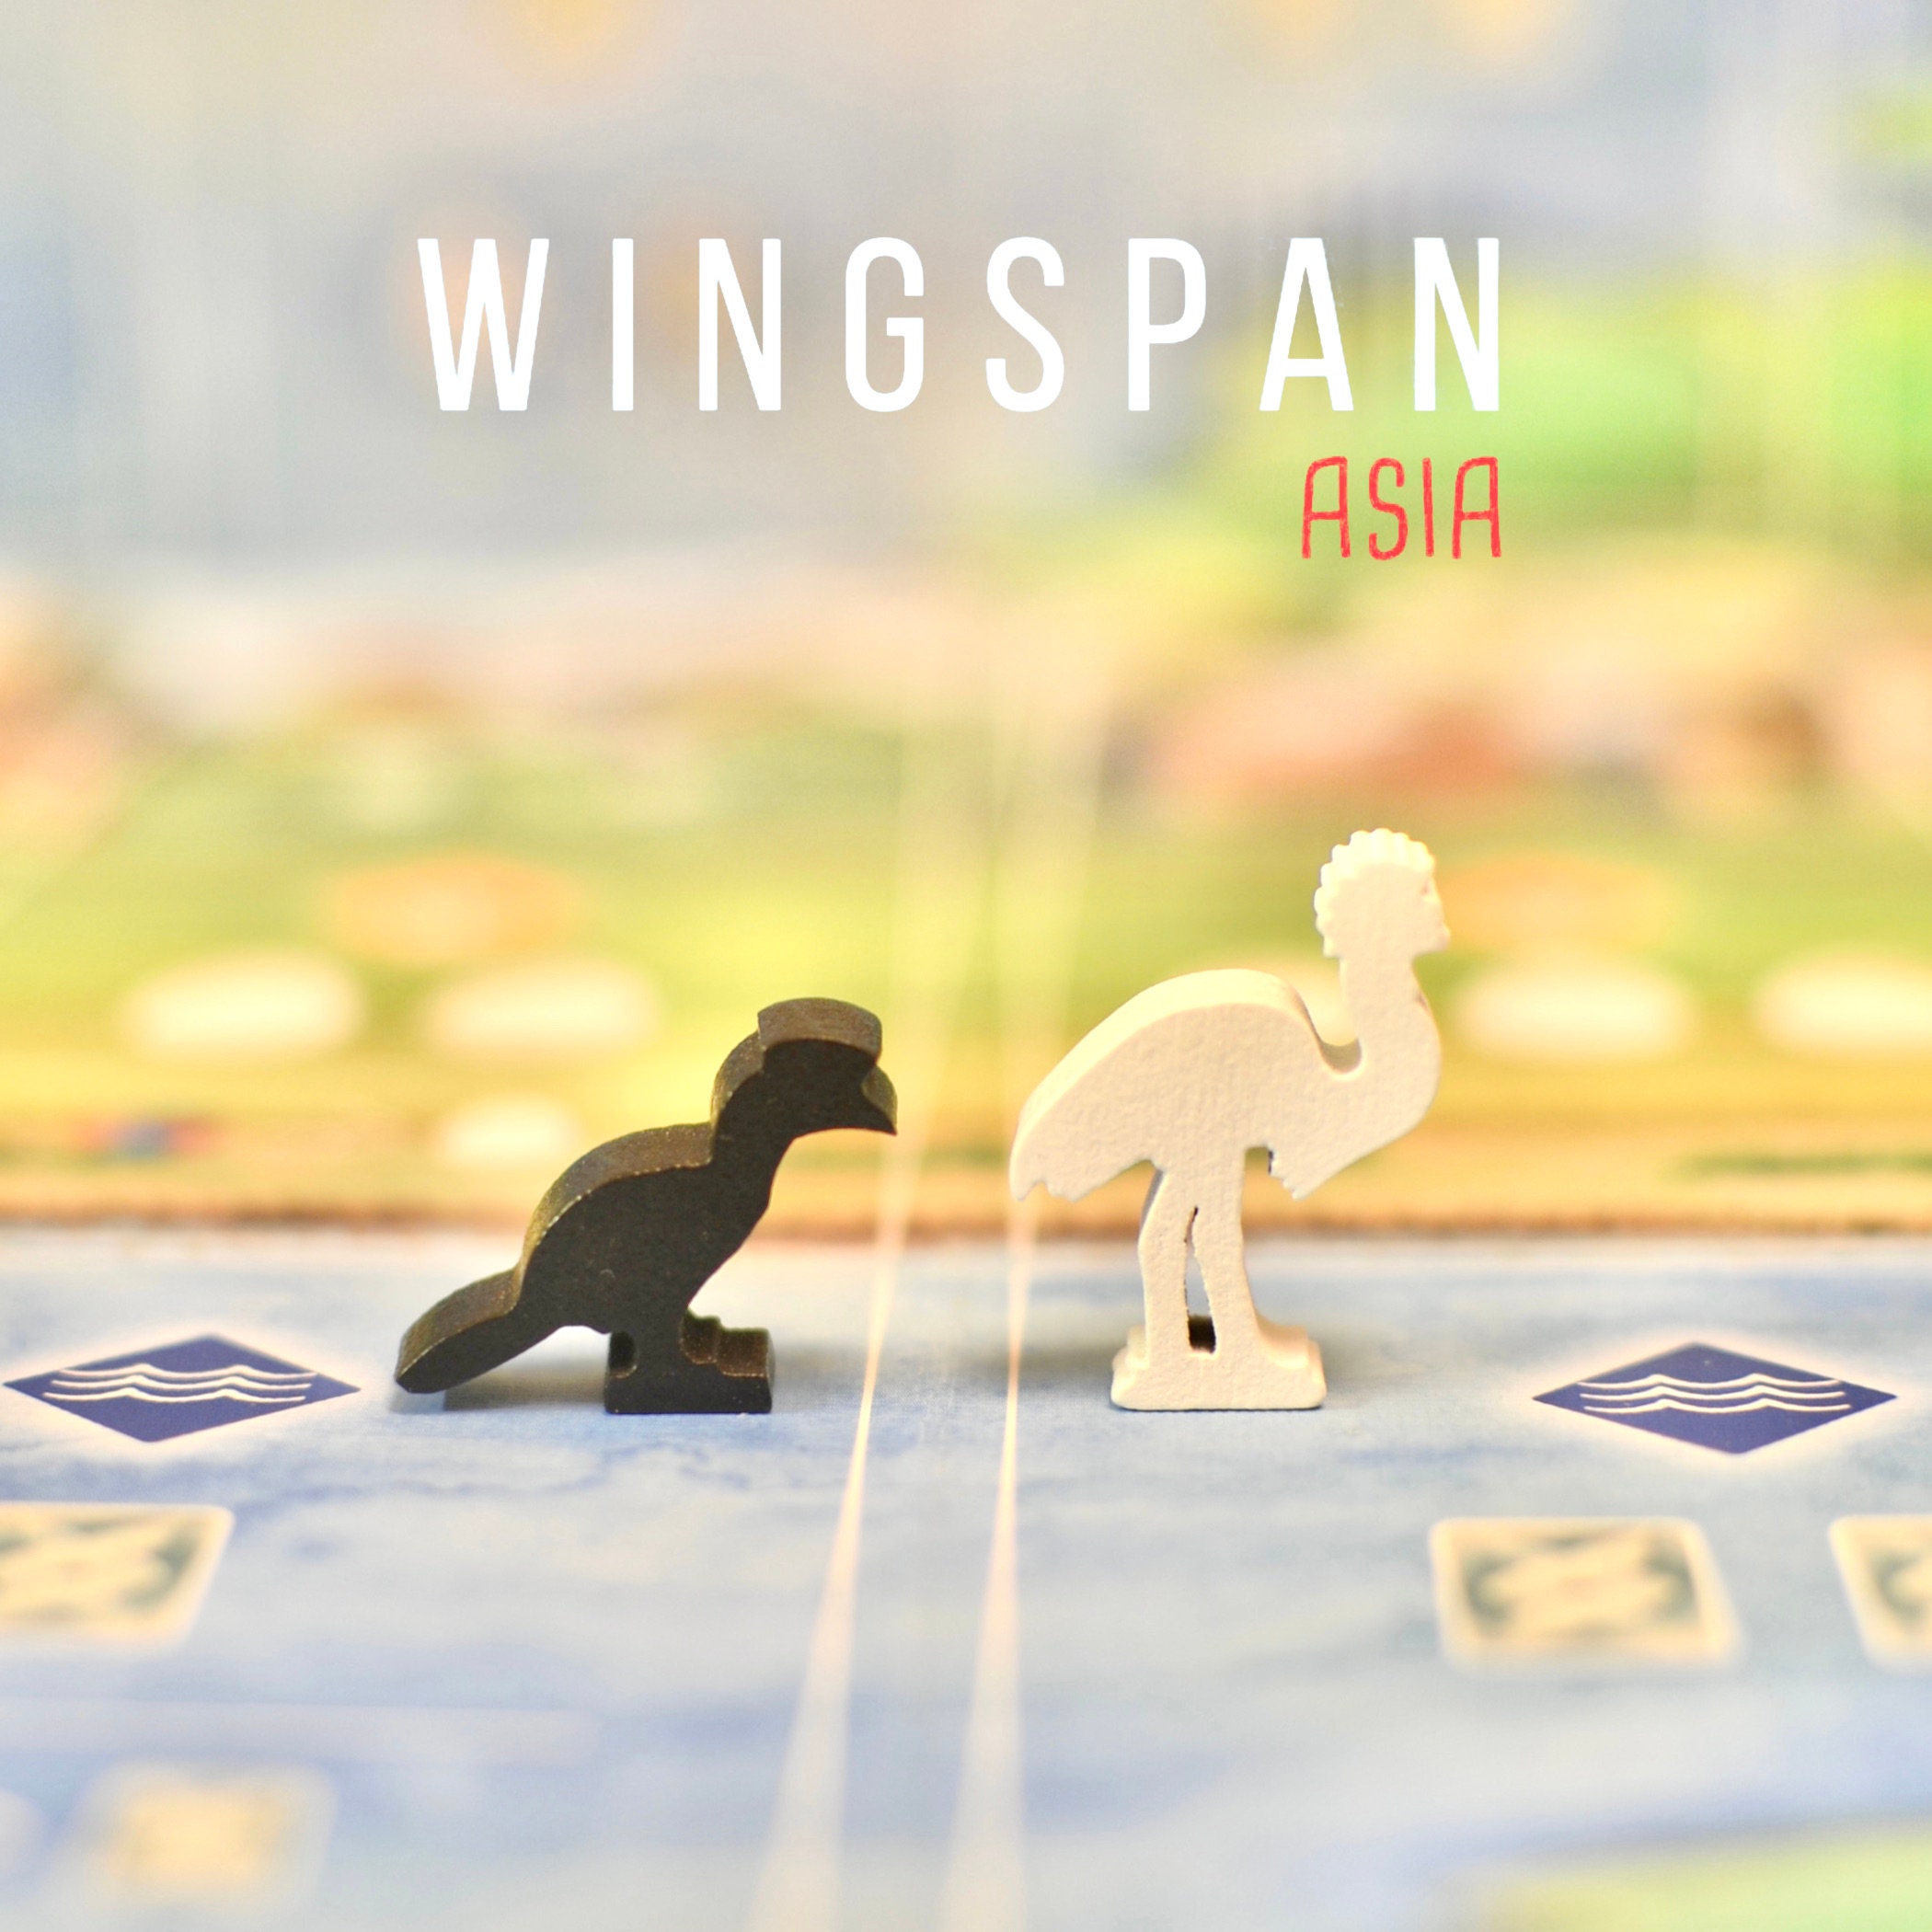 Wingspan game expansion introduces new birds from Asia